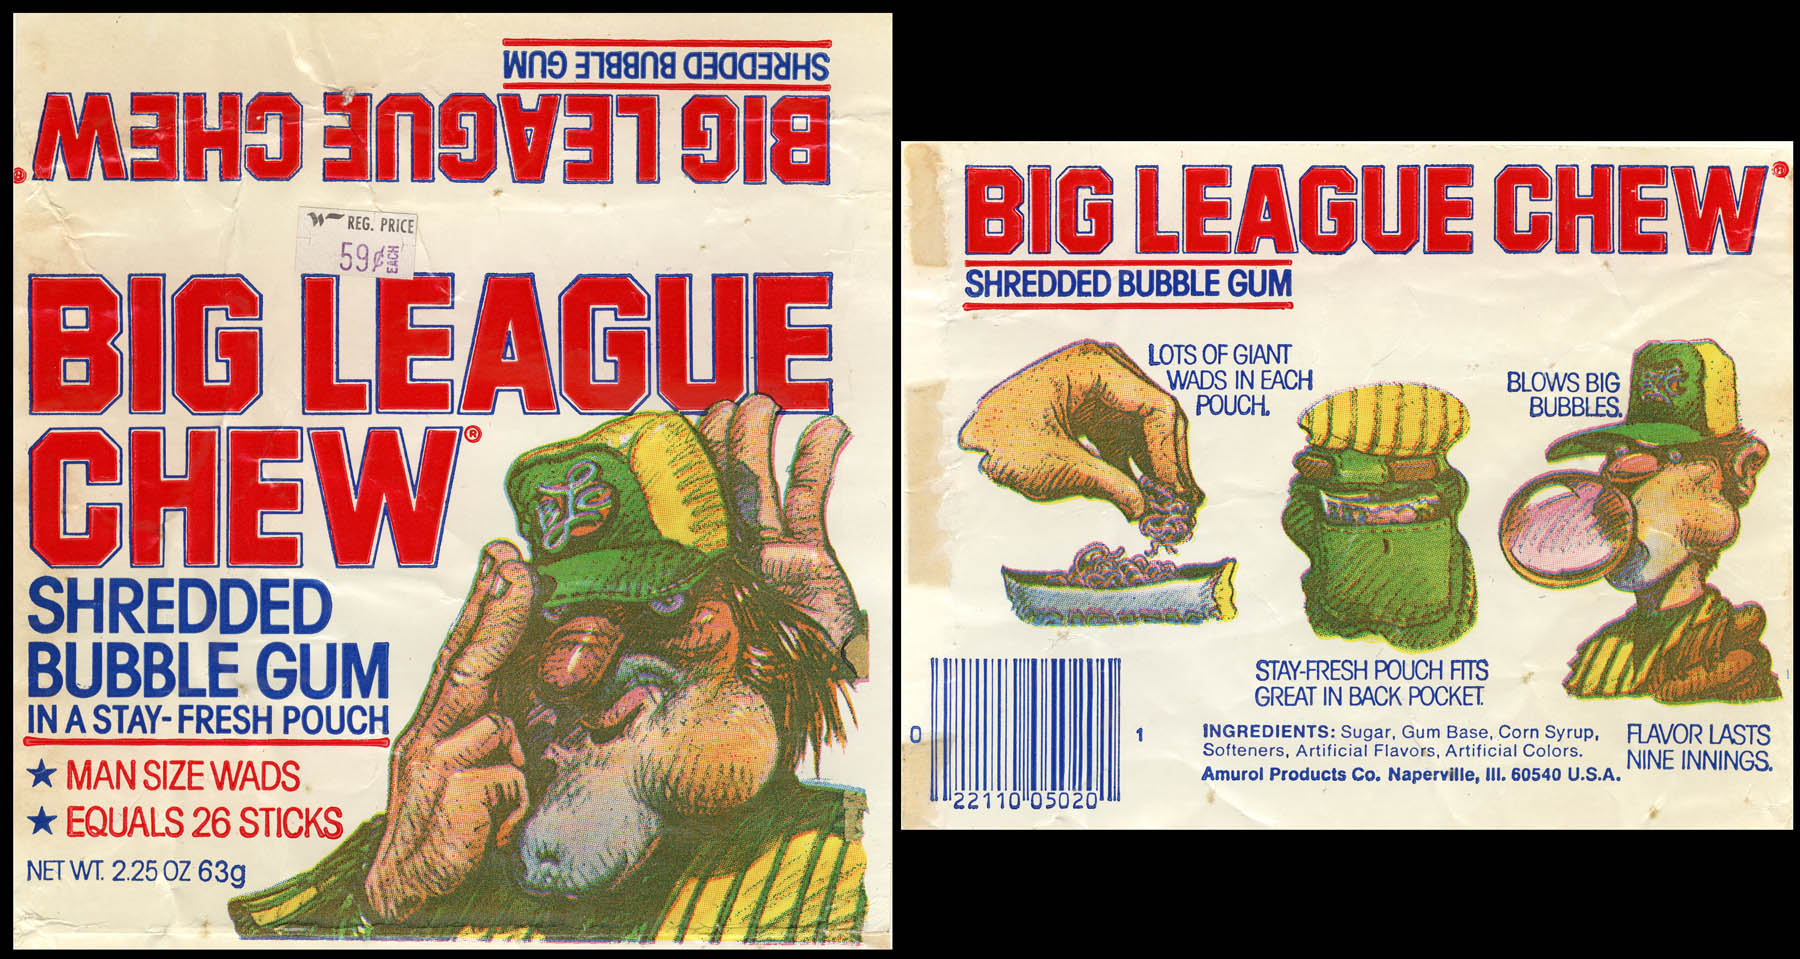 Big League Chew | Return to the 80s